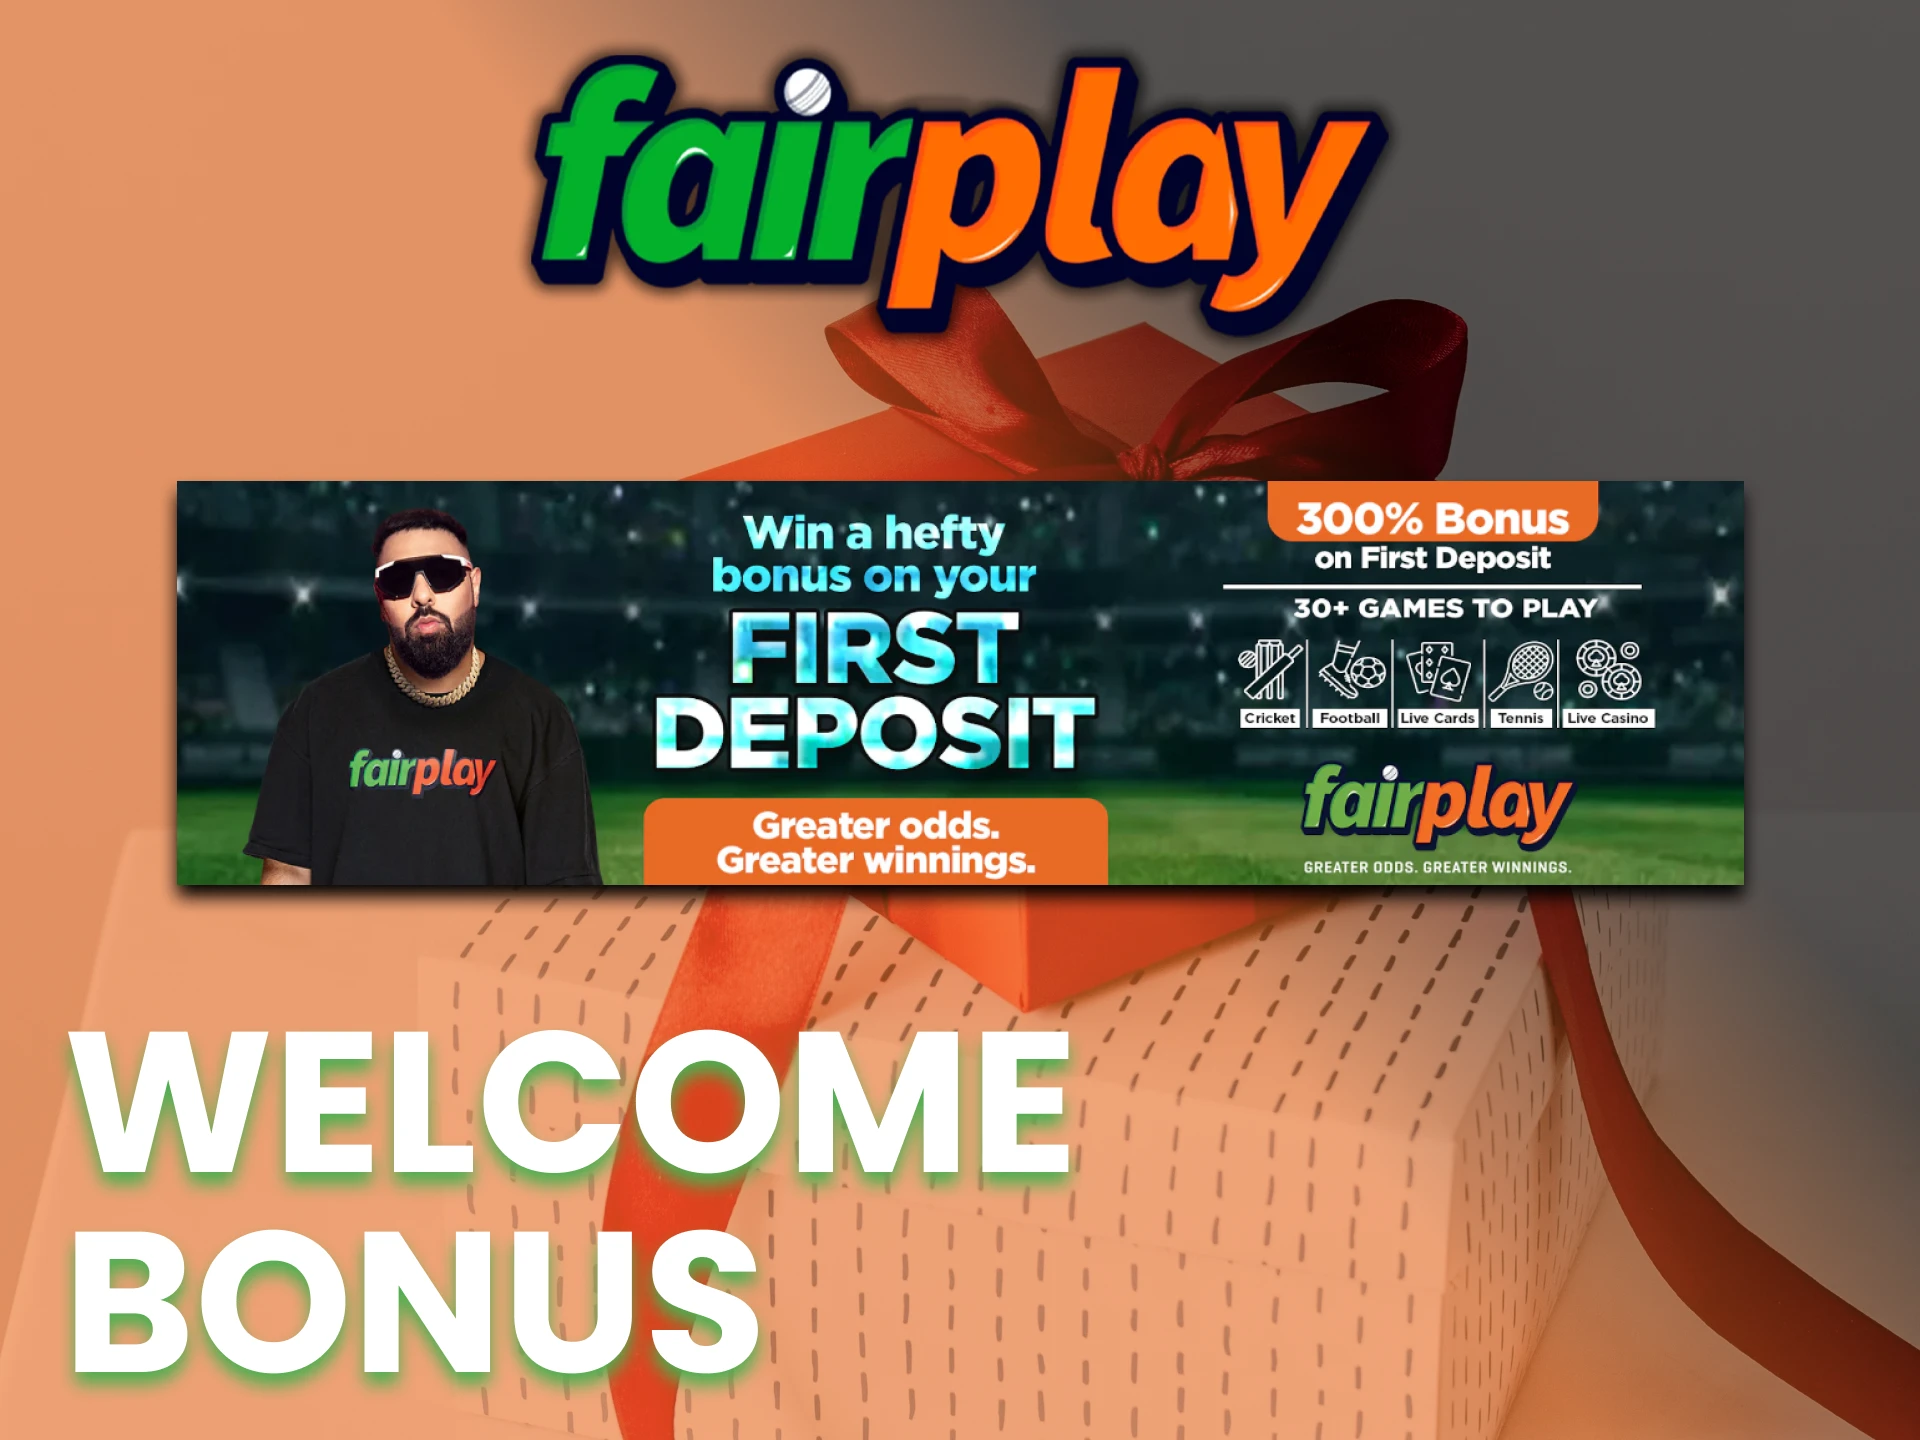 Make first deposit after registration and get your Fairplay welcome bonus.